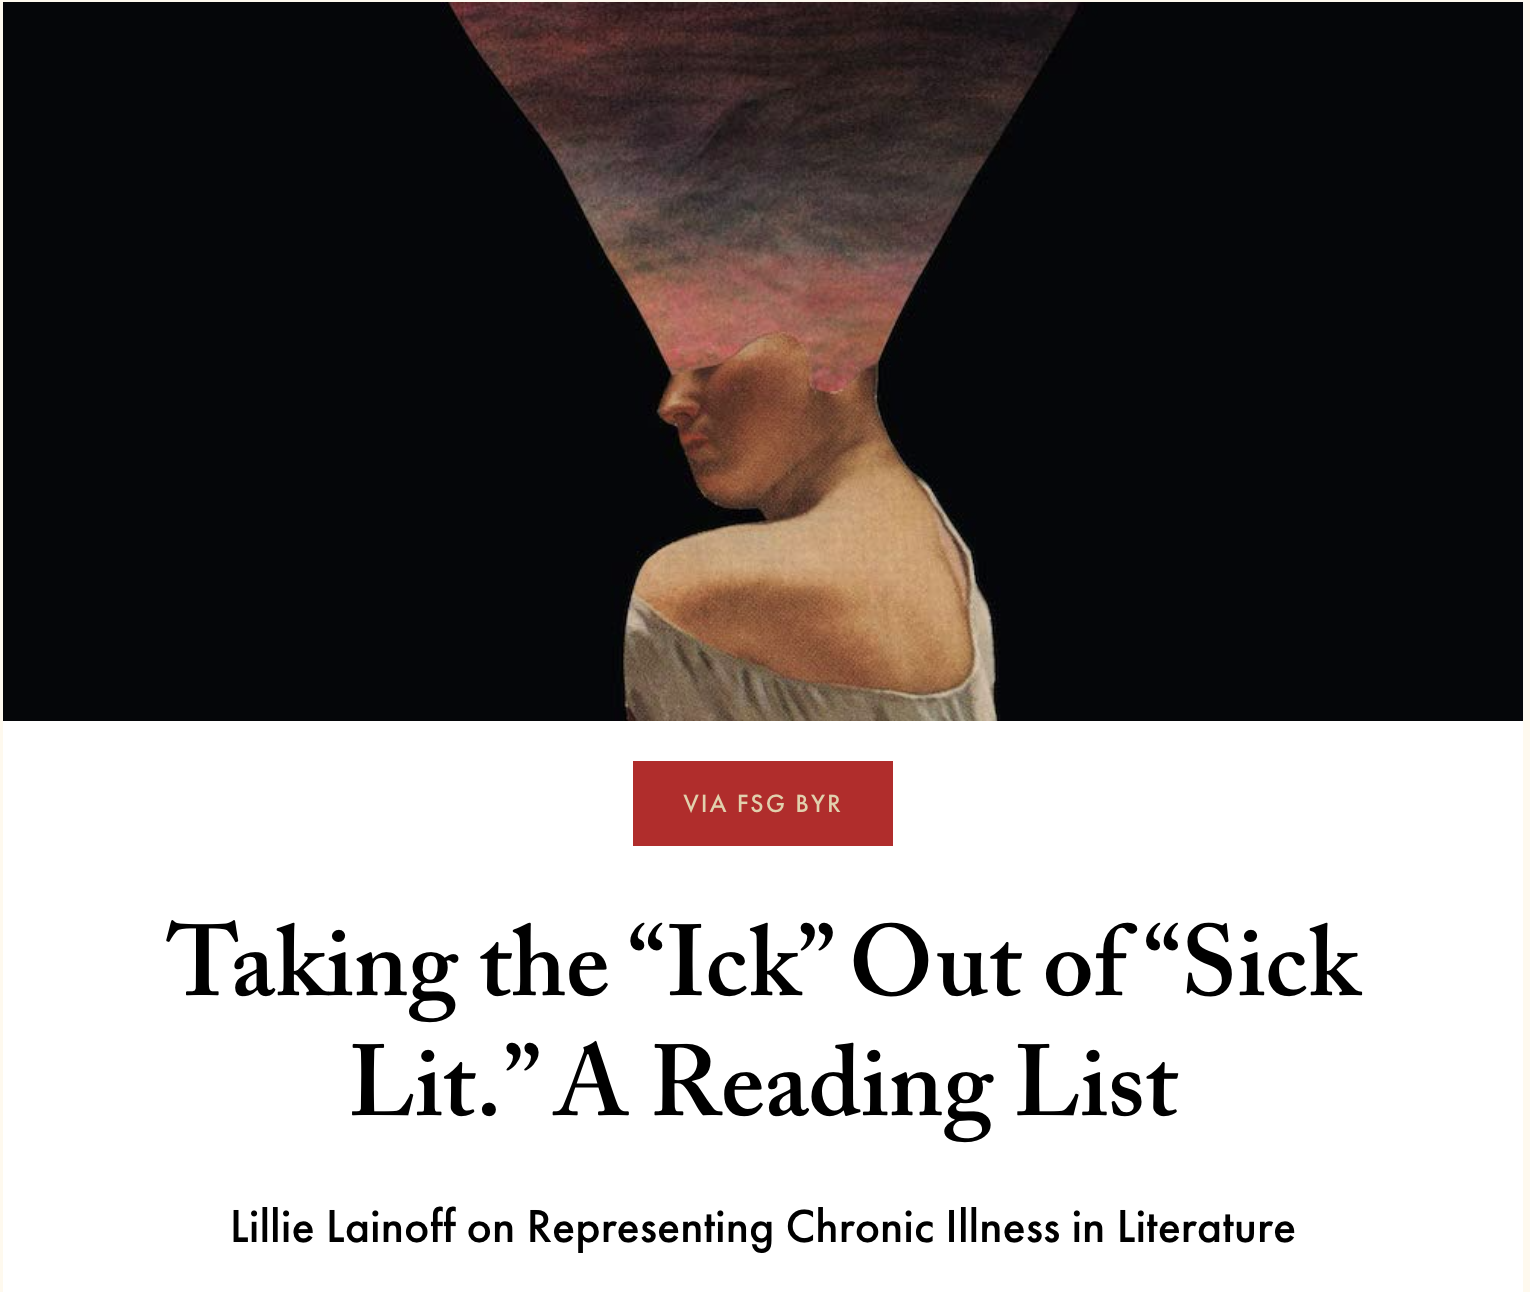 Lit Hub: Taking the "Ick" Out of "Sick Lit." A Reading List.